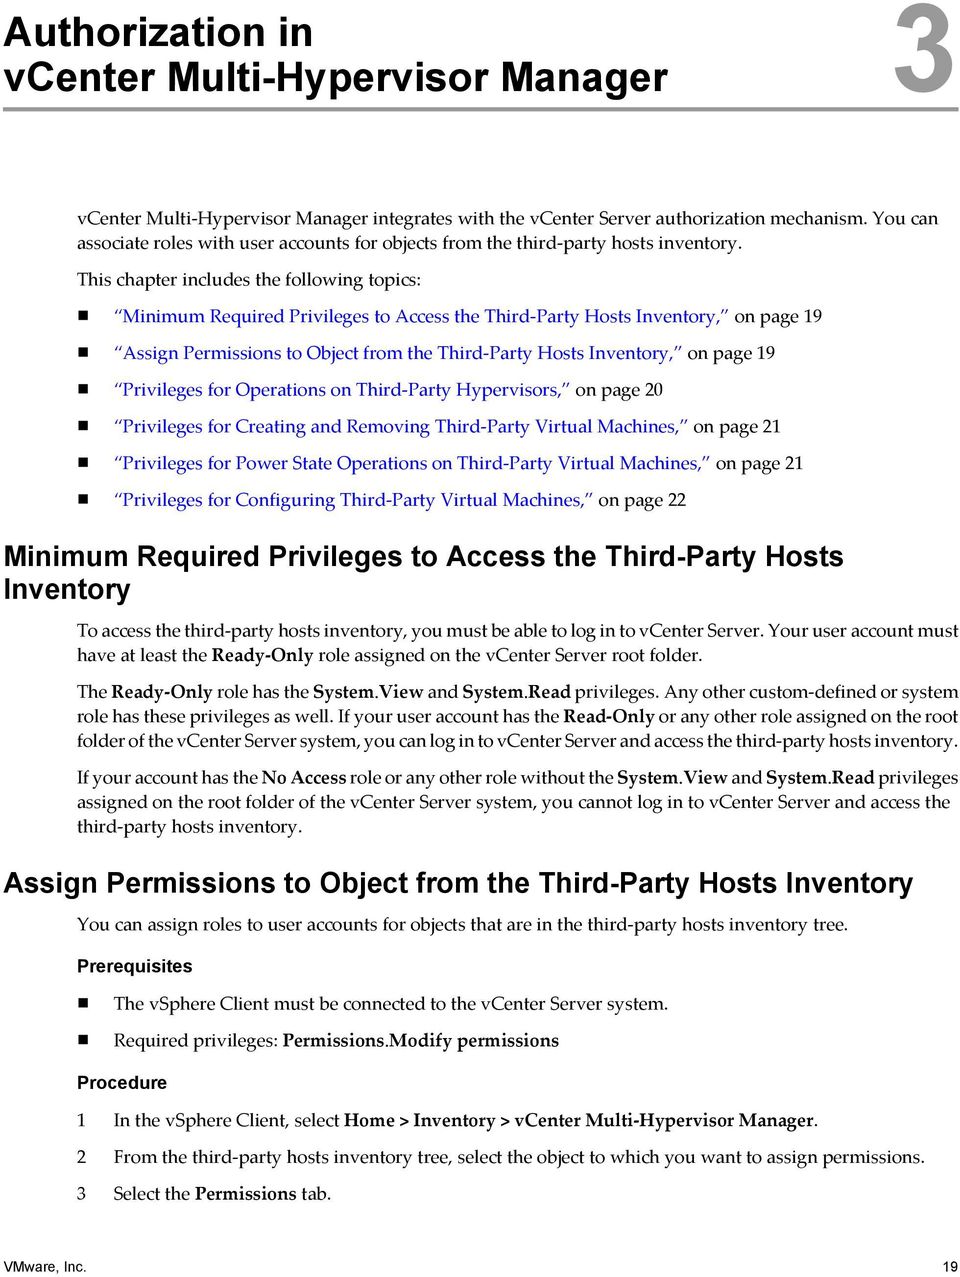 This chapter includes the following topics: Minimum Required Privileges to Access the Third-Party Hosts Inventory, on page 19 Assign Permissions to Object from the Third-Party Hosts Inventory, on